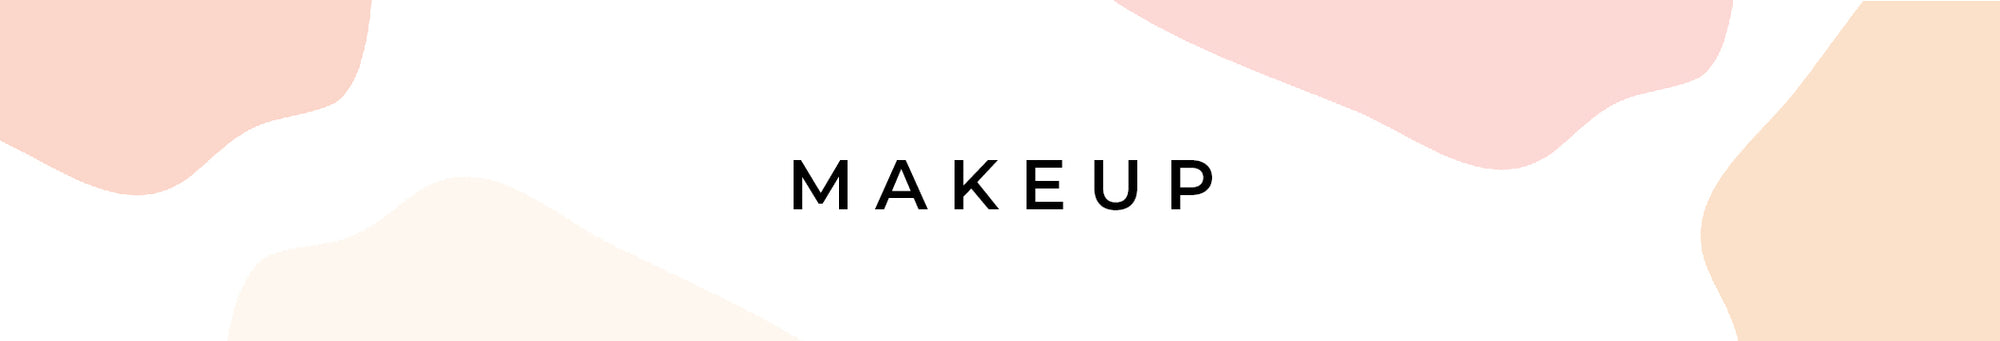 makeup-product-page